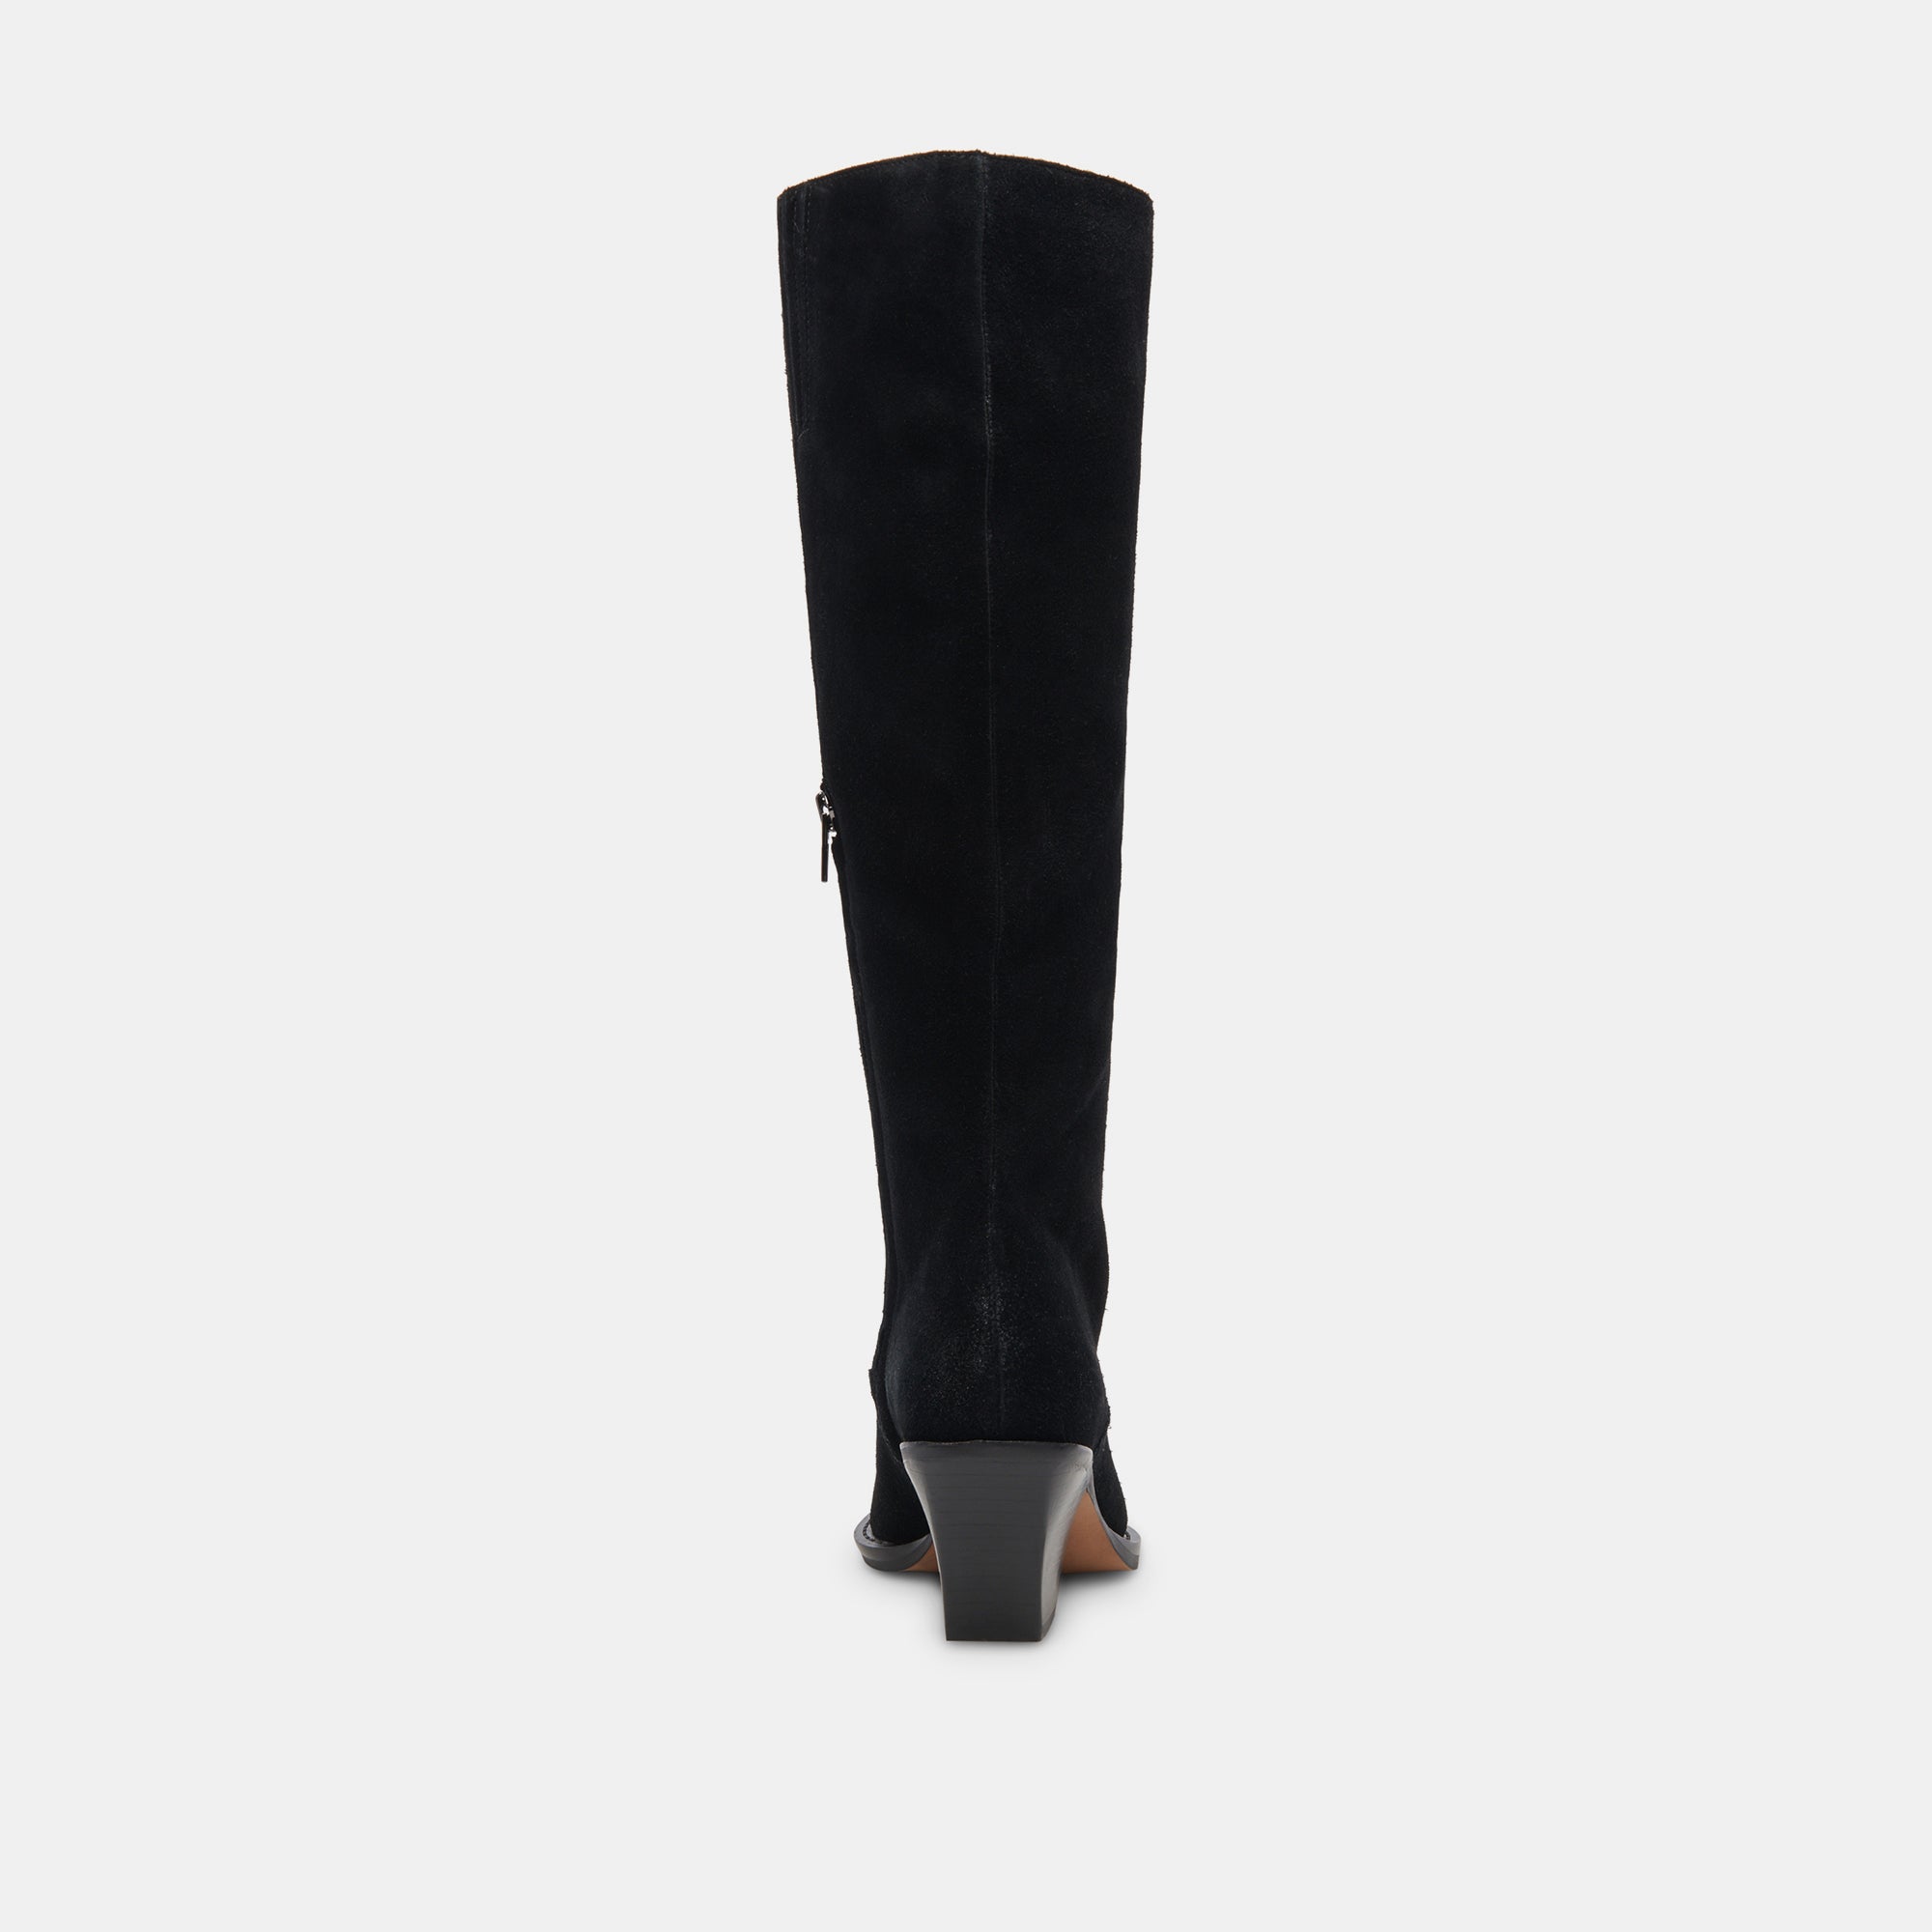 Annfield Extra Wide Calf Extra Wide Calf Ladies Boot Black Nappa/Stretch  Suede